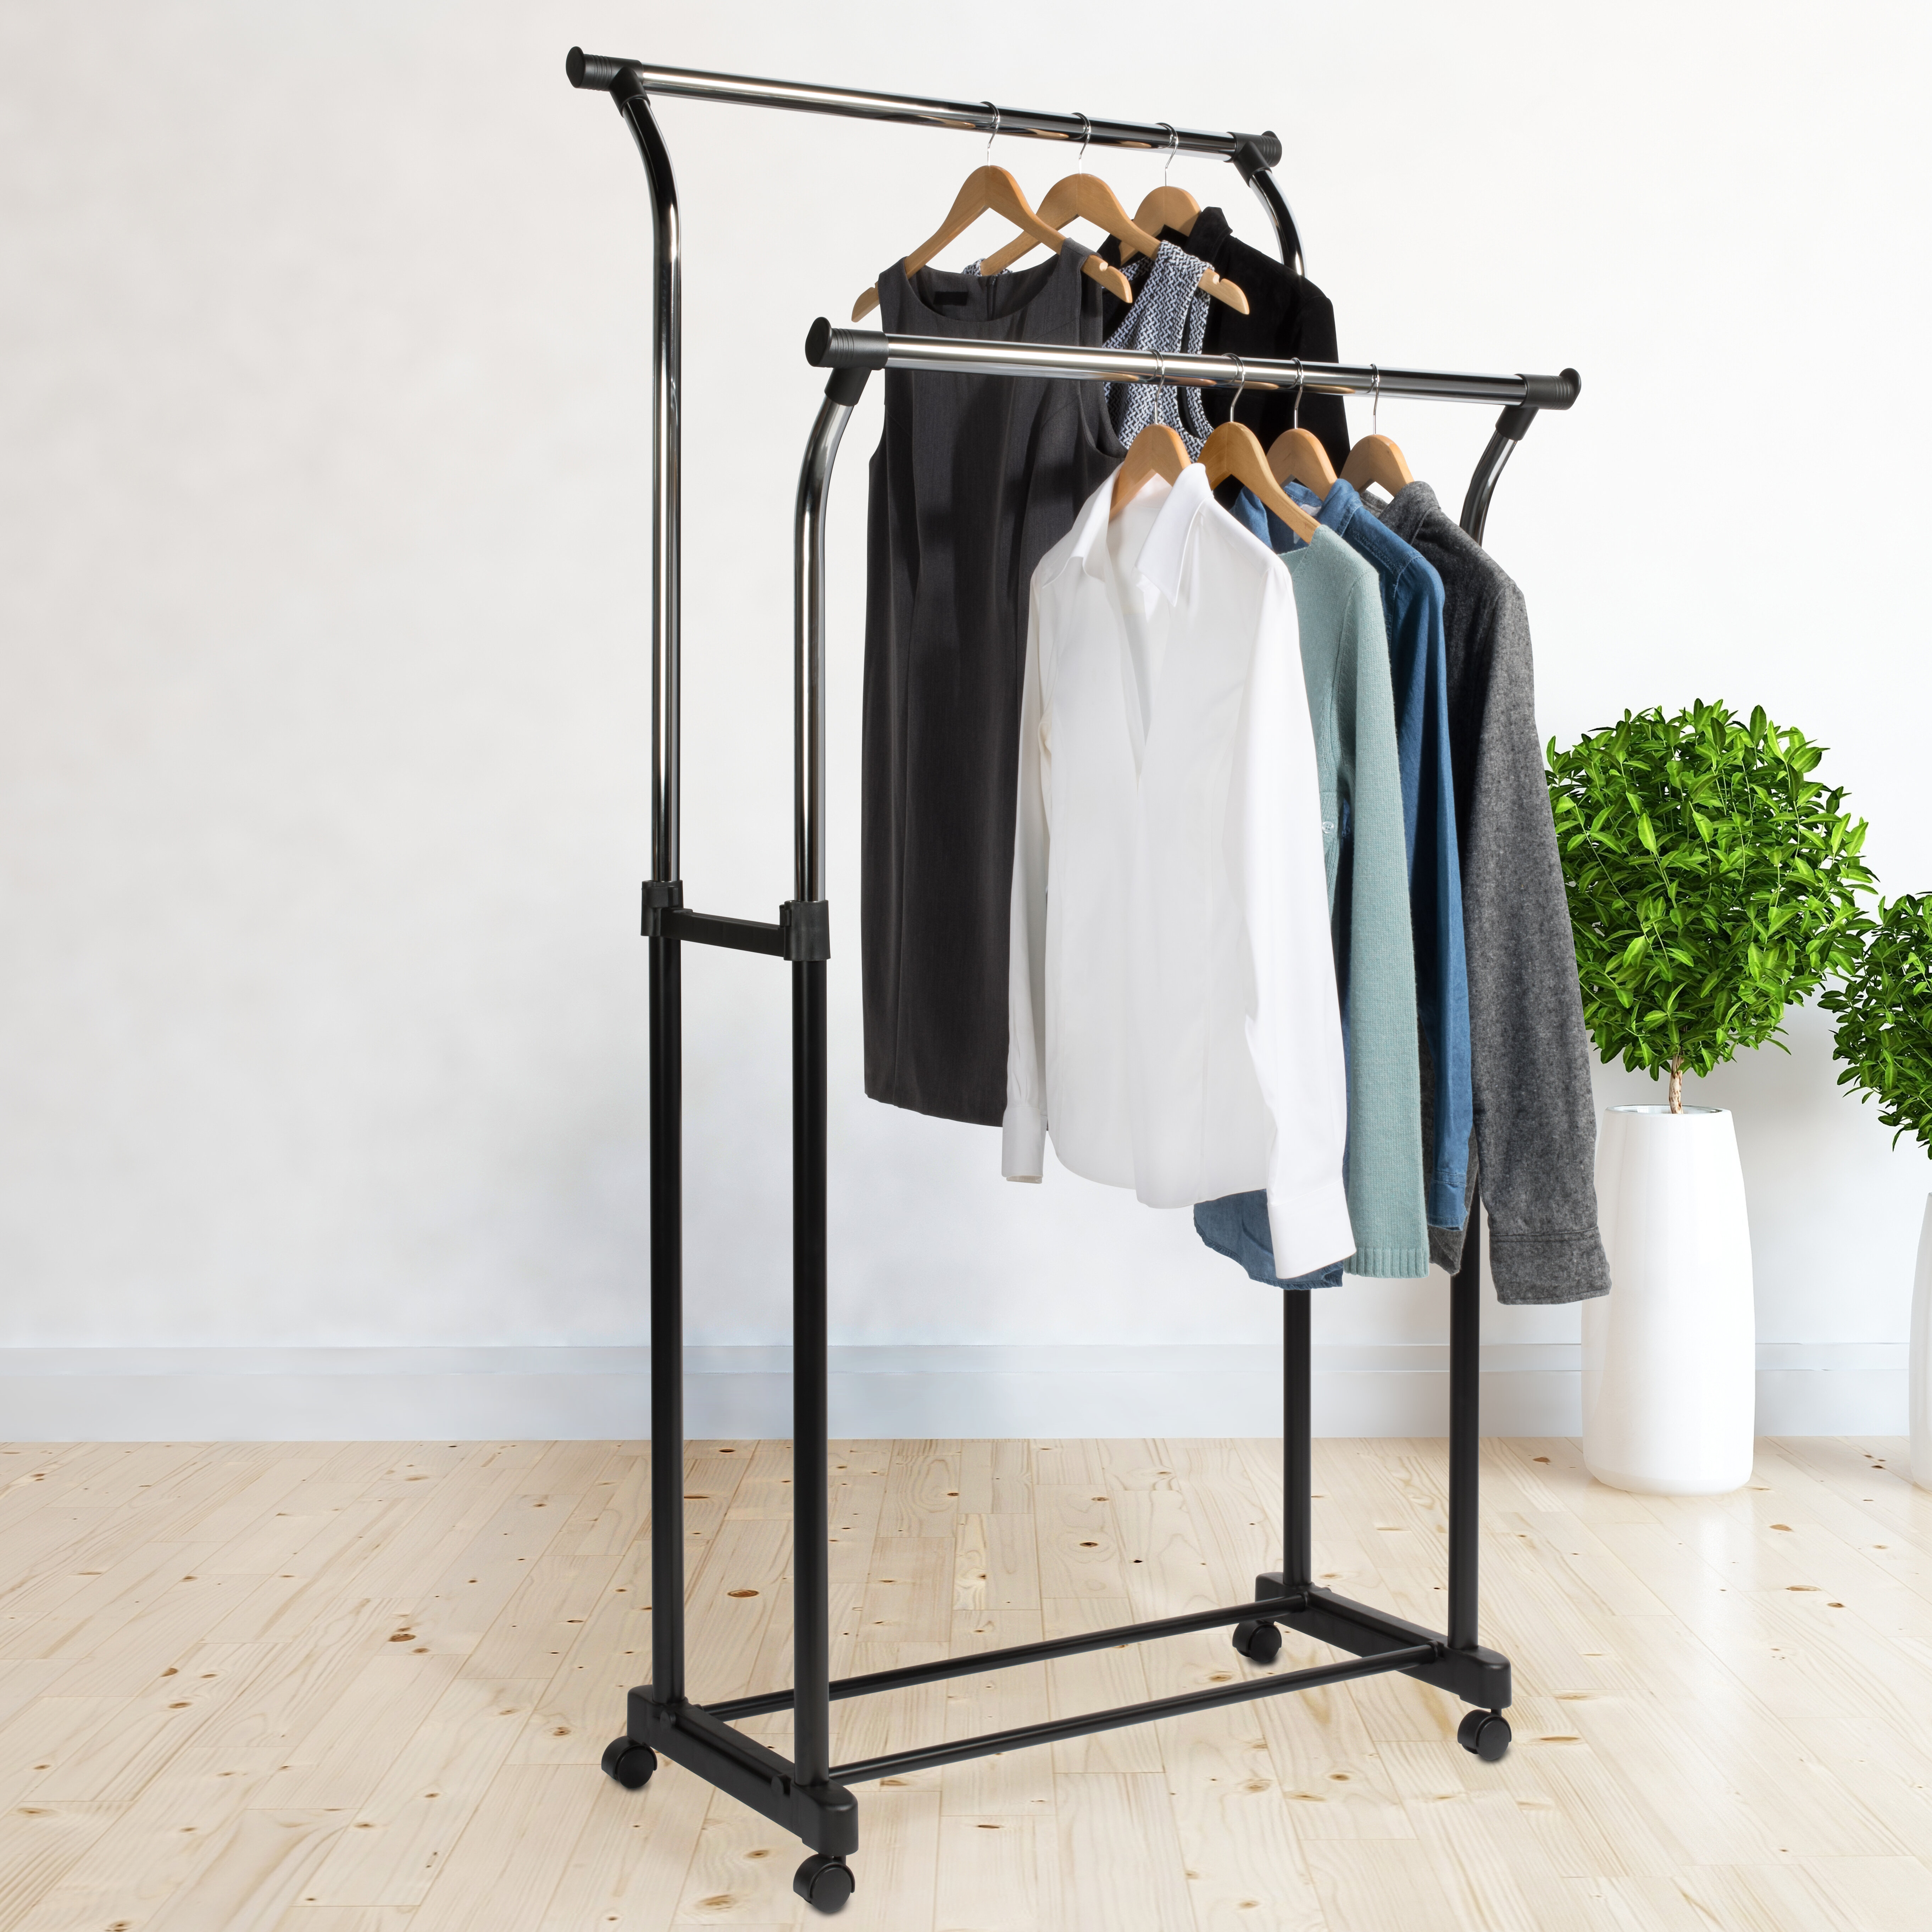 Heavy Duty Rolling Clothes Rack Hanging Garment Double Bar Durable Dry Hanger US